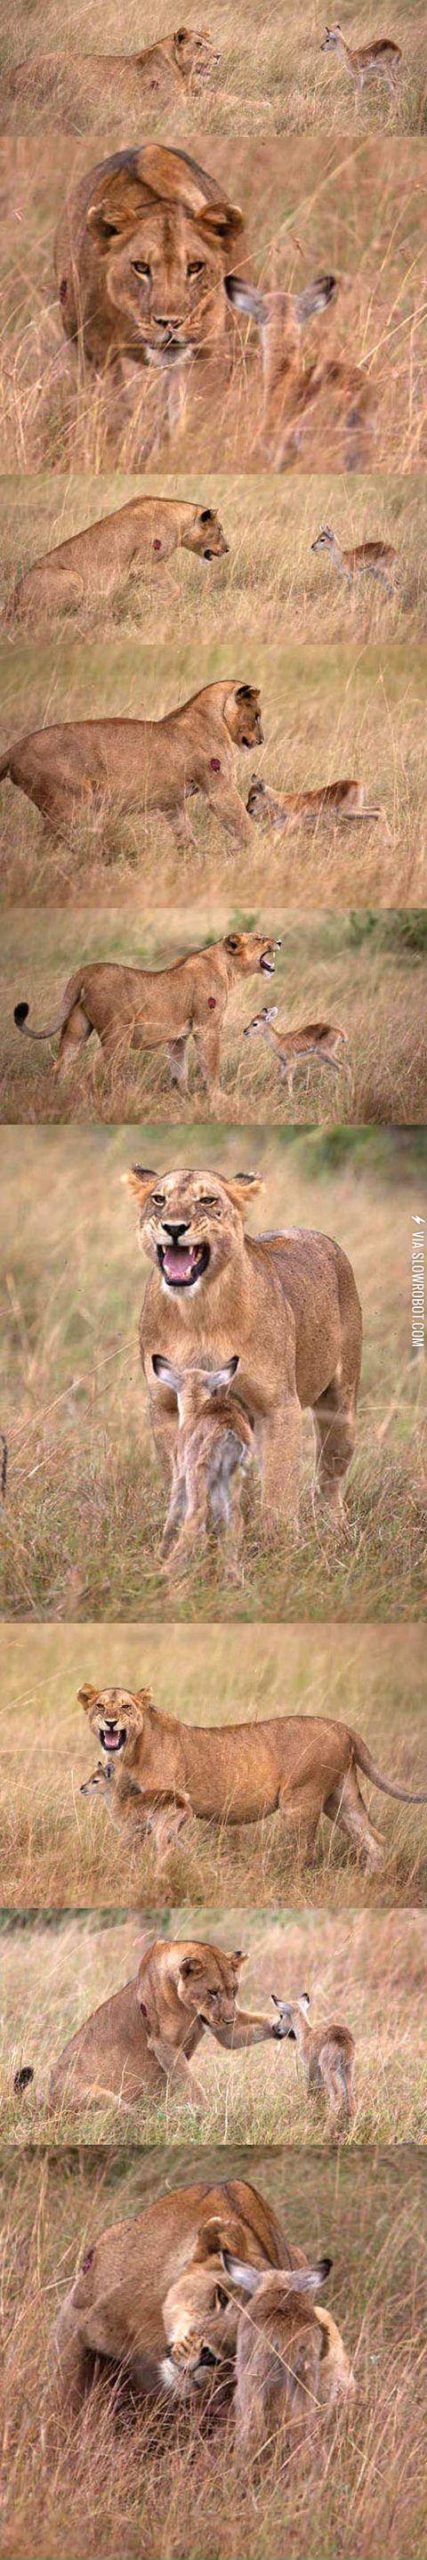 A+lioness+decides+to+adopt+a+baby+gazelle%3F